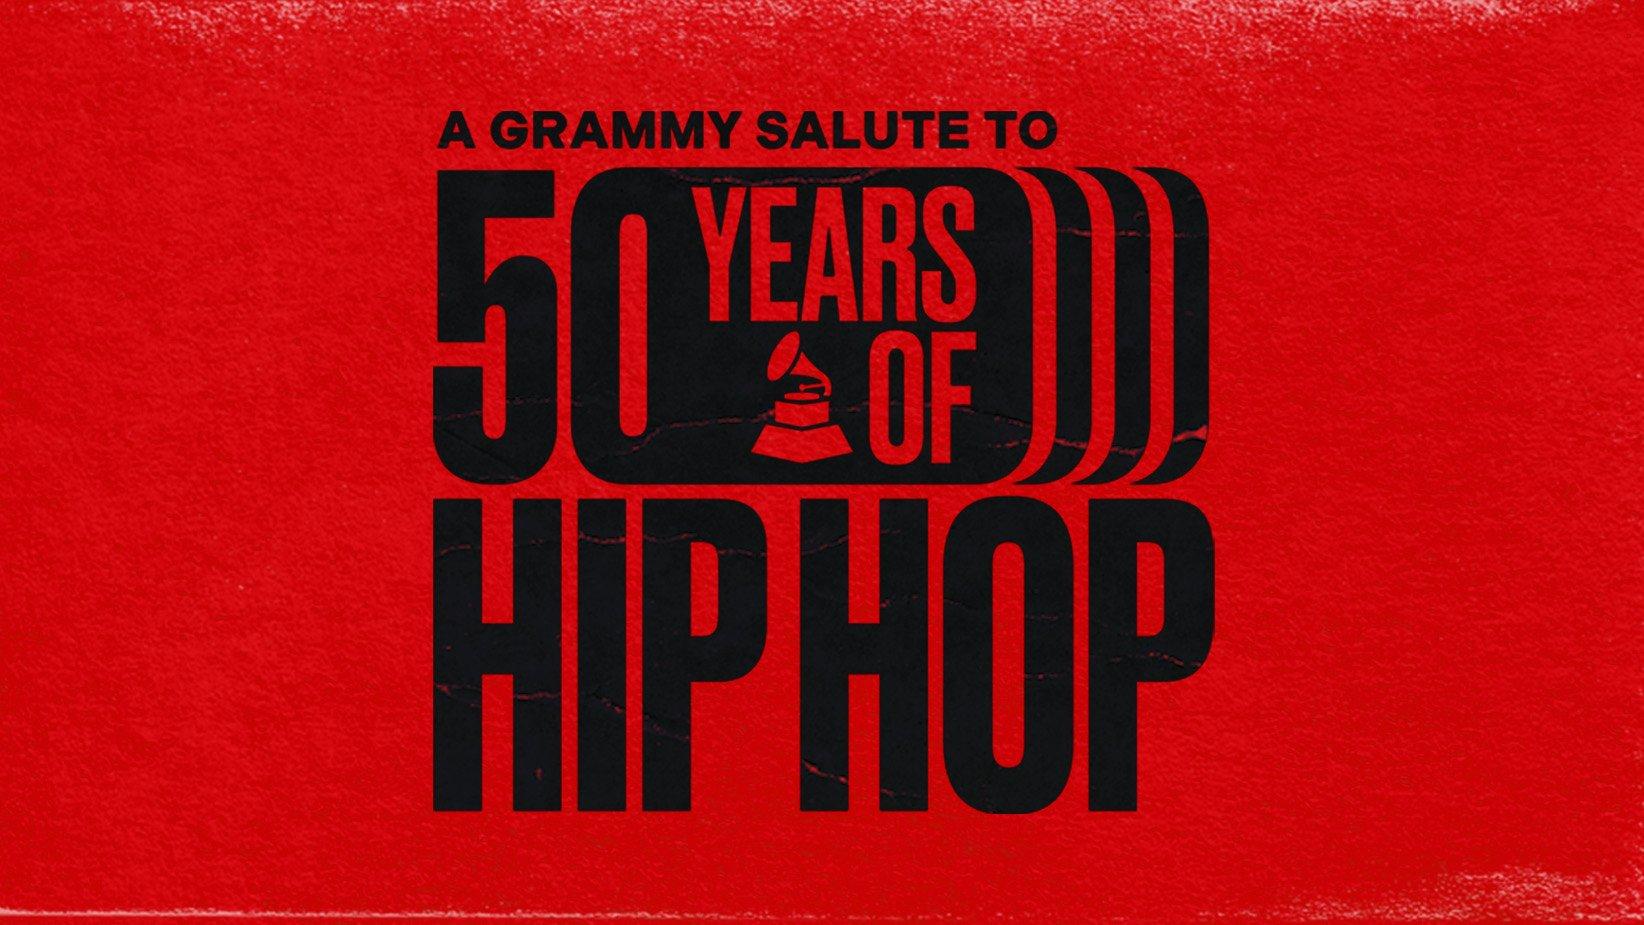 "A GRAMMY Salute to 50 Years of Hip-Hop" airs Sunday, Dec. 10, at 8:30 – 10:30 p.m. ET/PT on the CBS Television Network and streaming live and on demand on Paramount+.